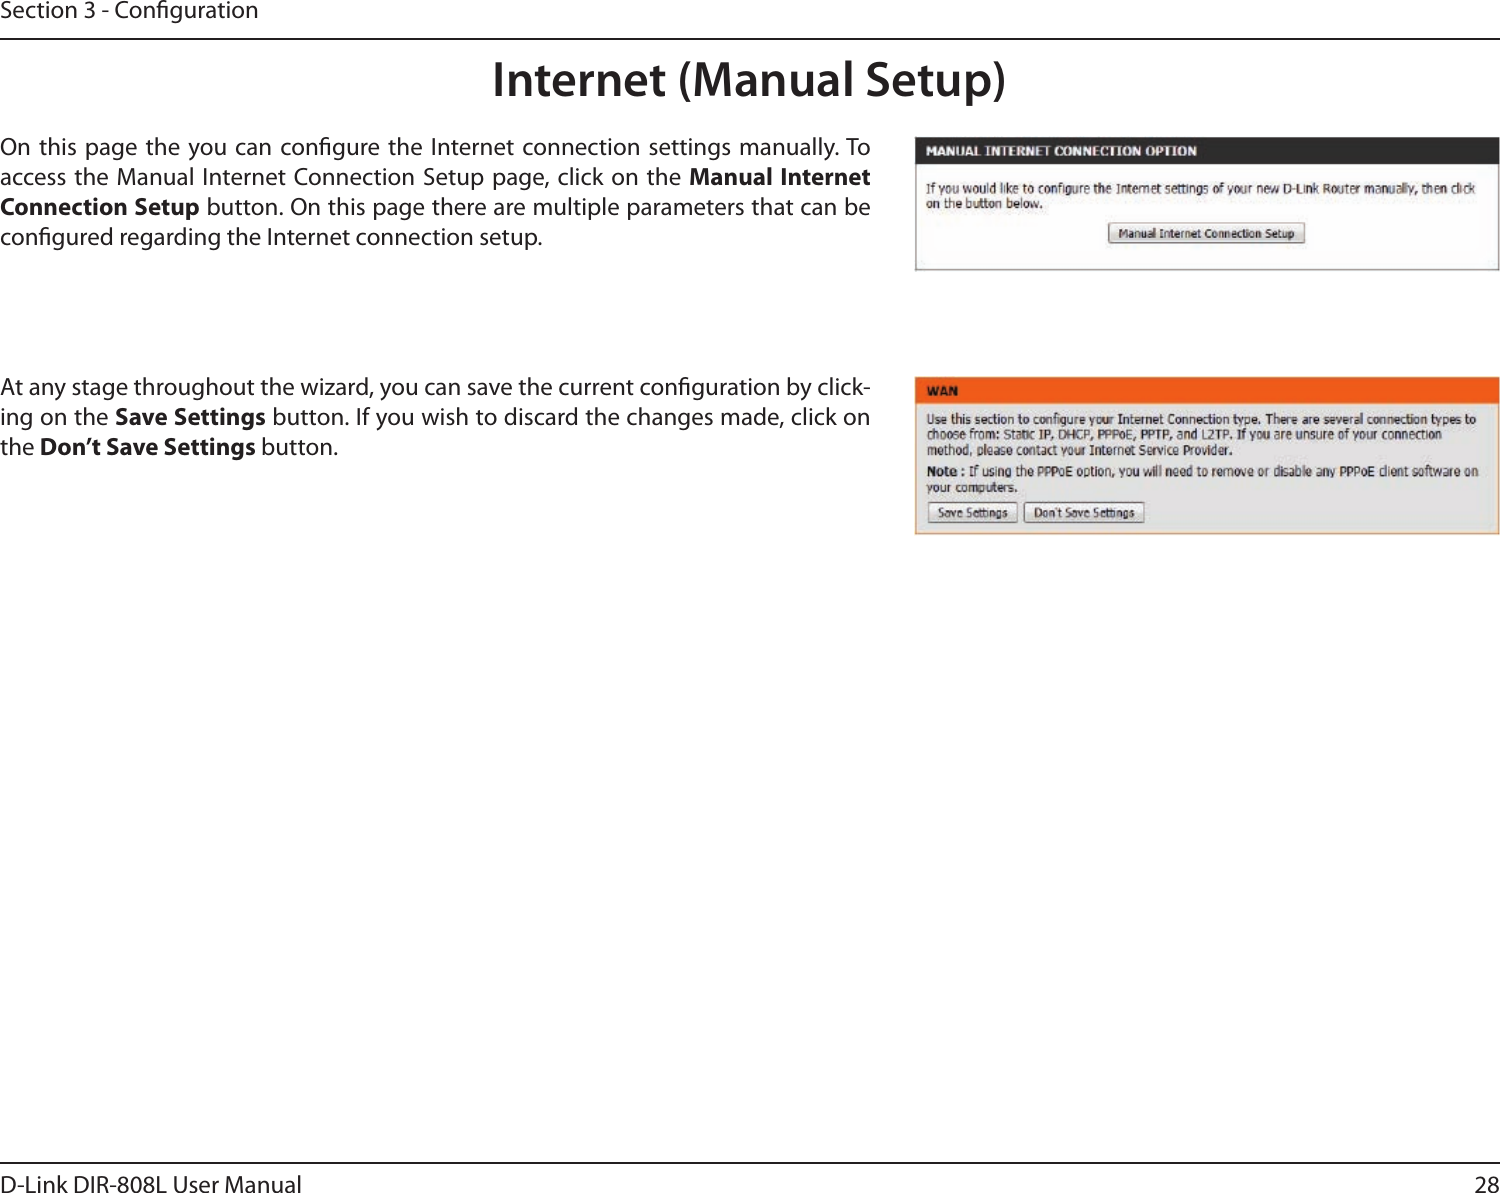 28D-Link DIR-808L User ManualSection 3 - CongurationInternet (Manual Setup)On this  page the  you can  congure the Internet connection settings  manually. To access the Manual Internet Connection Setup  page, click on the  Manual Internet Connection Setup button. On this page there are multiple parameters that can be congured regarding the Internet connection setup. At any stage throughout the wizard, you can save the current conguration by click-ing on the Save Settings button. If you wish to discard the changes made, click on the Don’t Save Settings button.